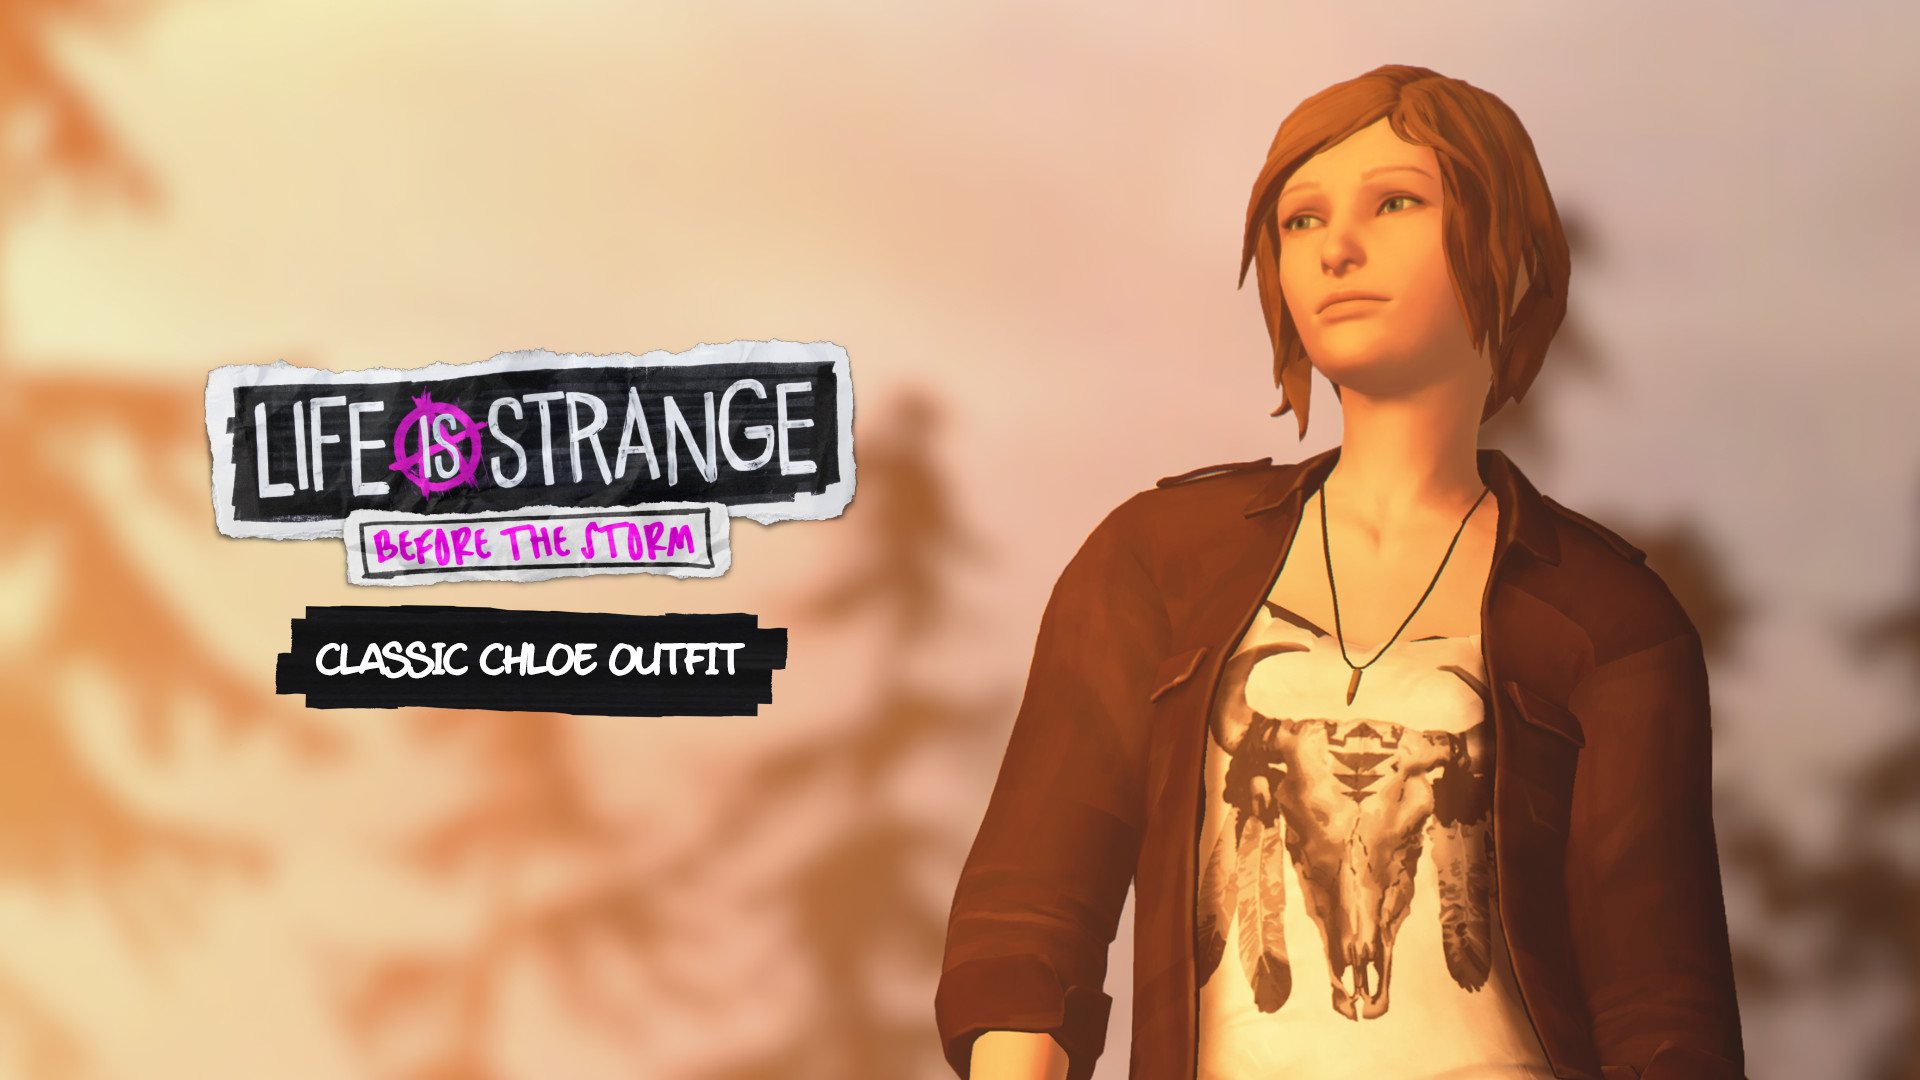 Life is Strange: Before the Storm - Classic Chloe Outfit Pack DLC XBOX One CD Key USD 0.89